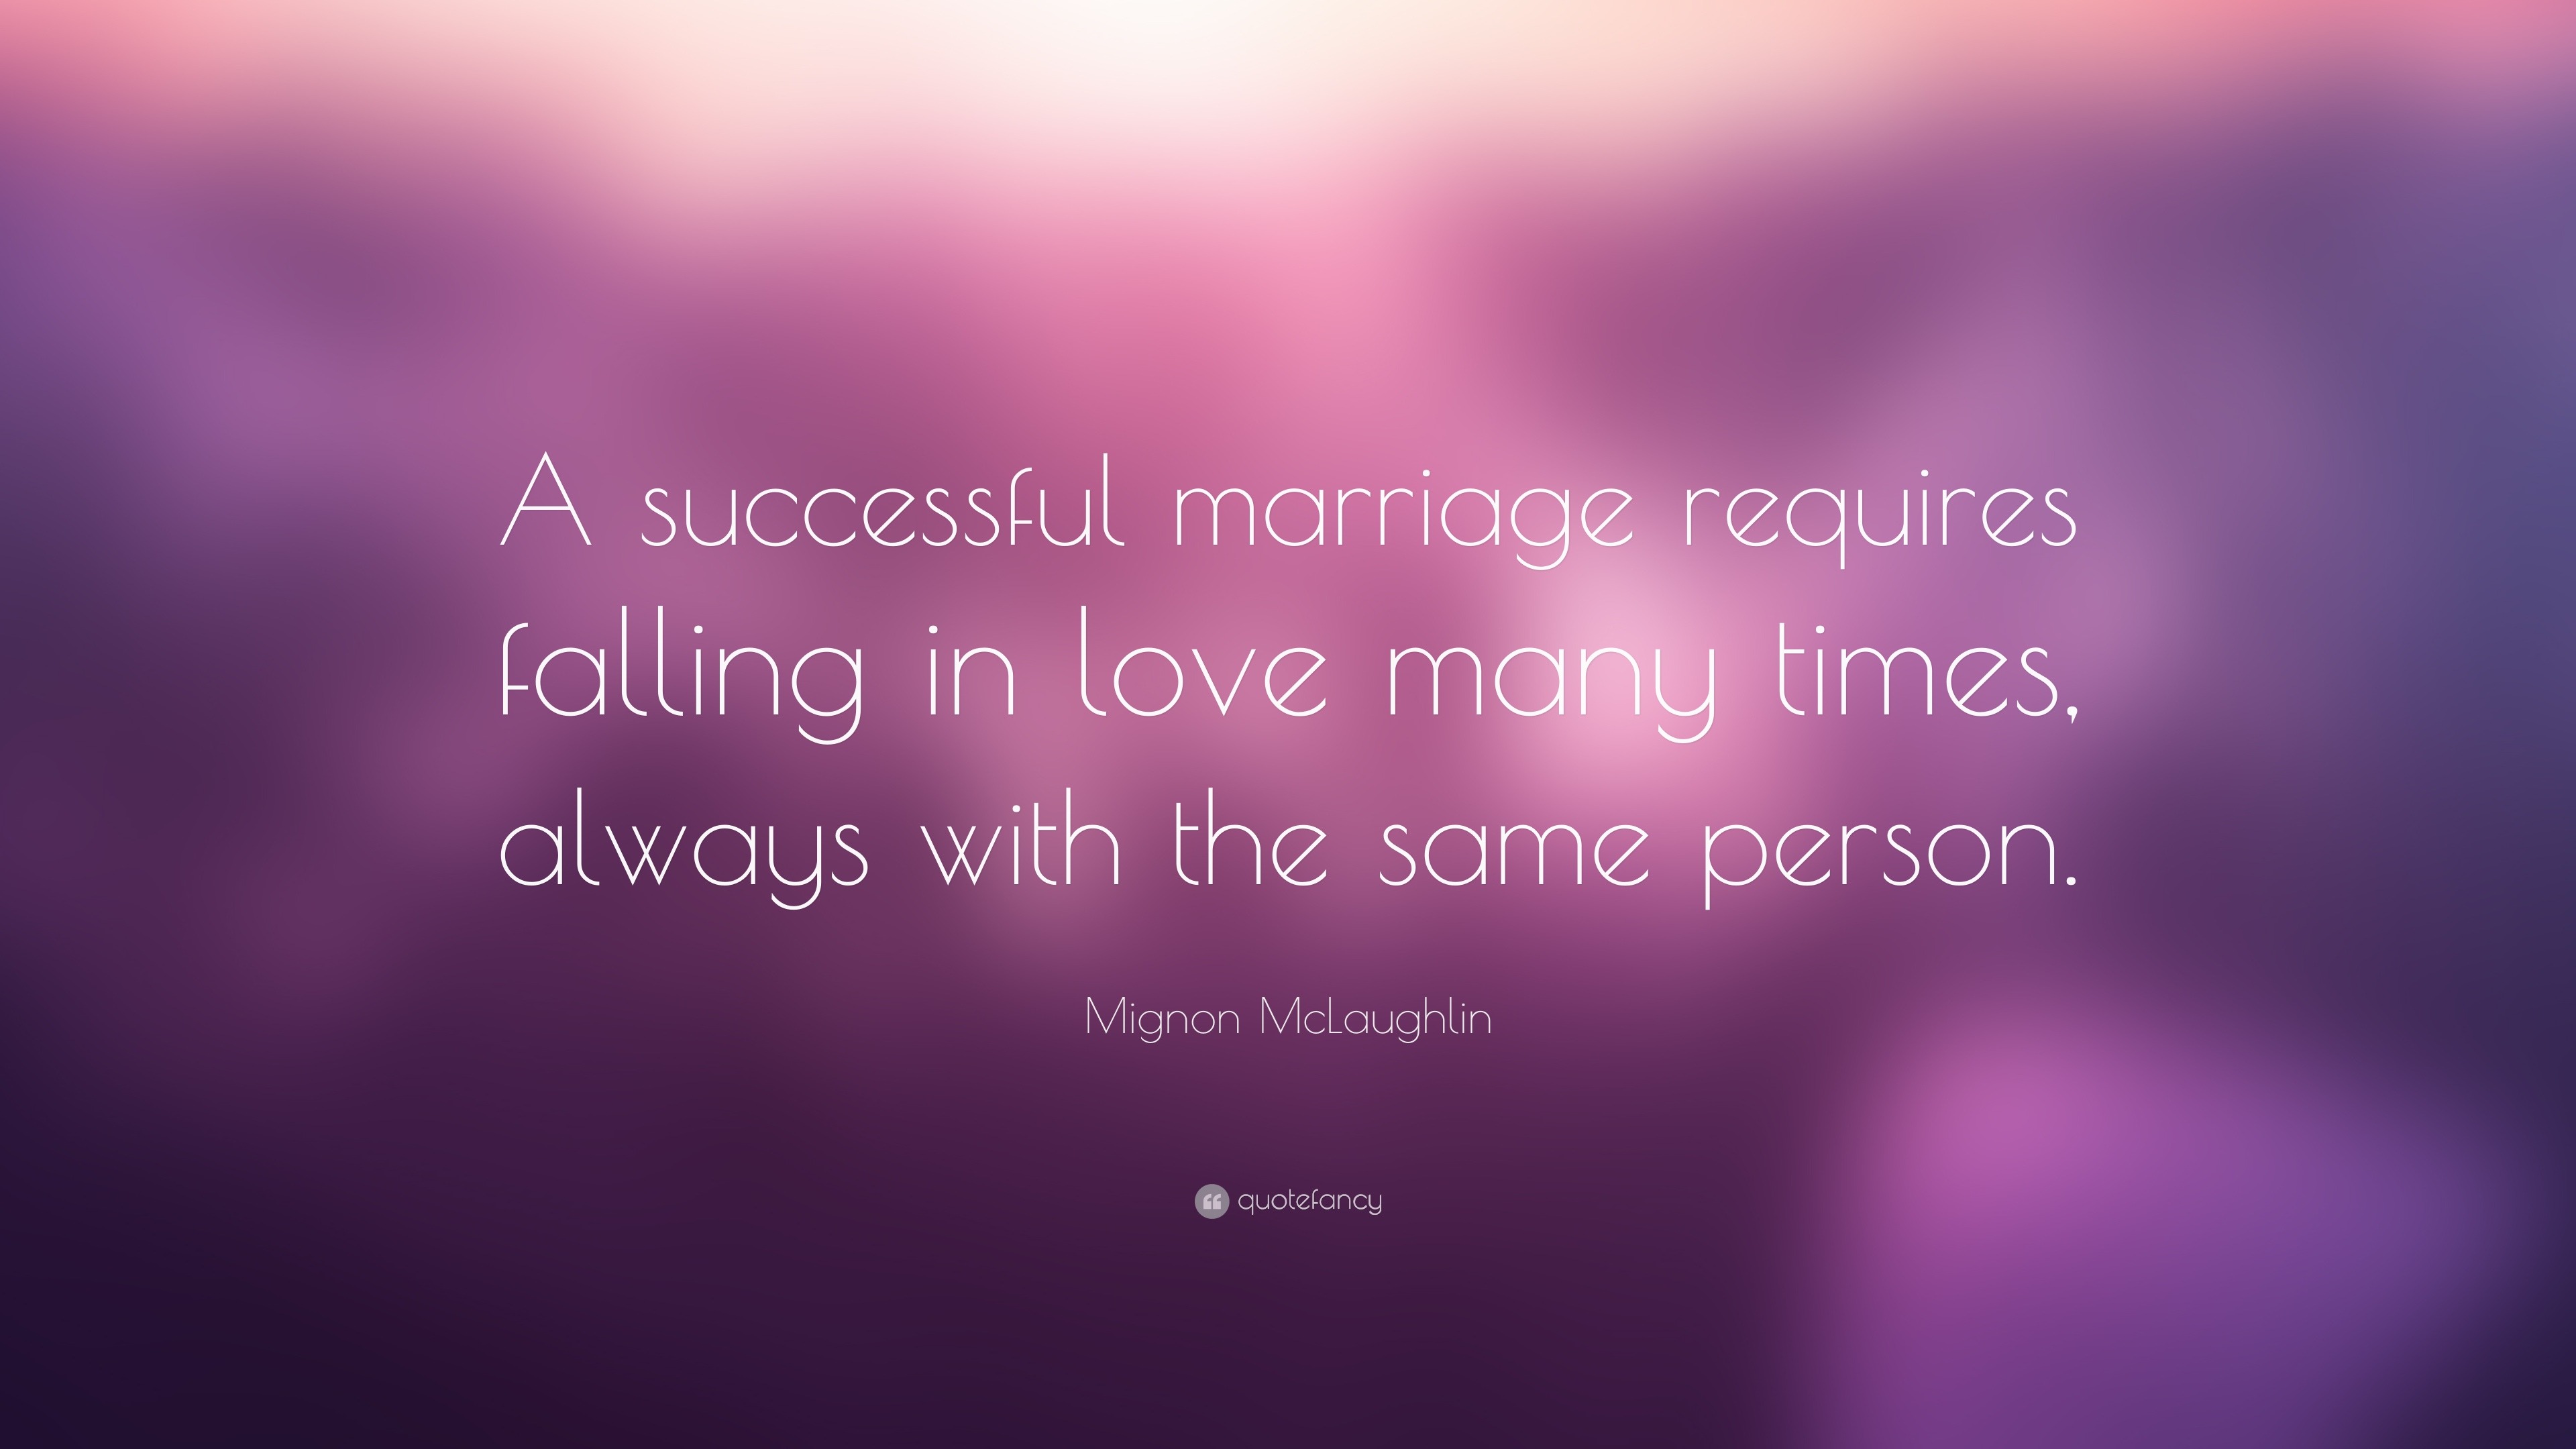 Mignon McLaughlin Quote “A successful marriage requires falling in love many times always